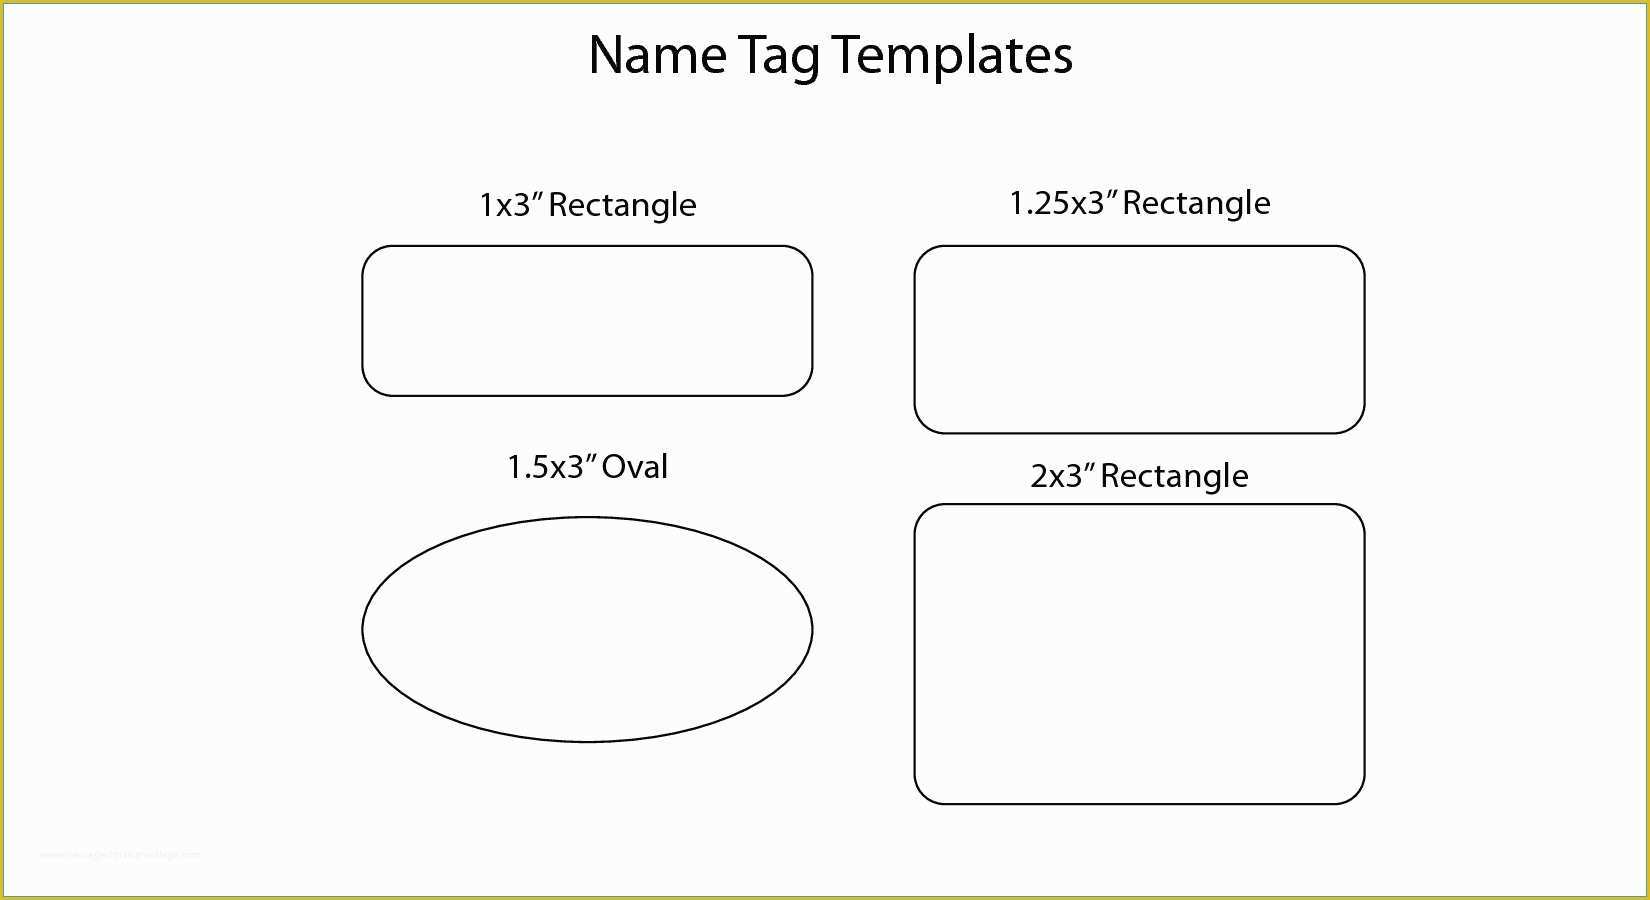 Free Name Badge Template Of 100 Pin by Muse Printables Name Tags at Nametagjungle